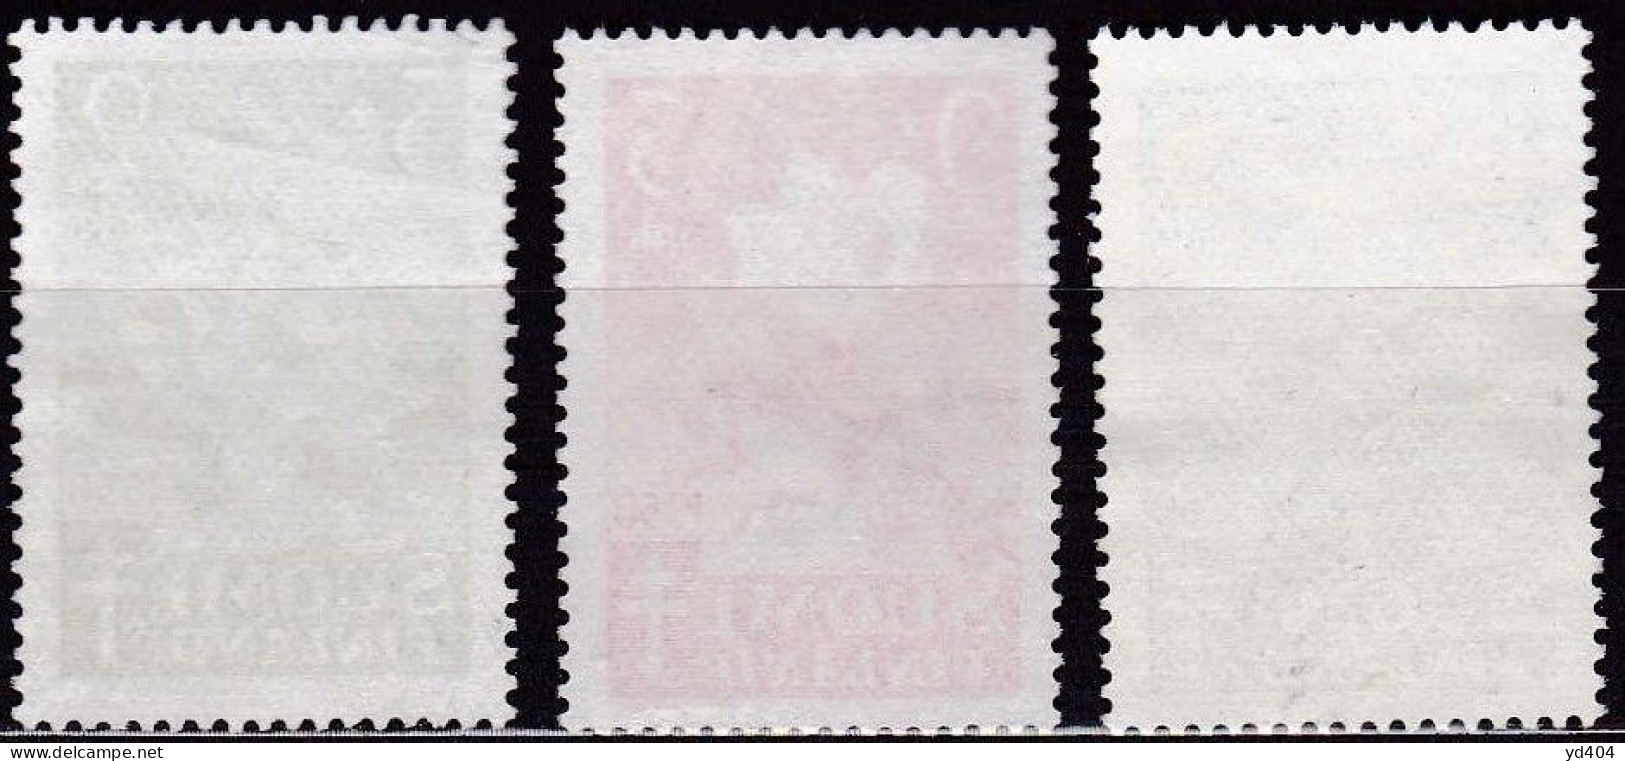 FI082 – FINLANDE – FINLAND – 1950 – ANTI-TUBERCULOSIS FUND – Y&T 368/70 USED 8,50 € - Used Stamps